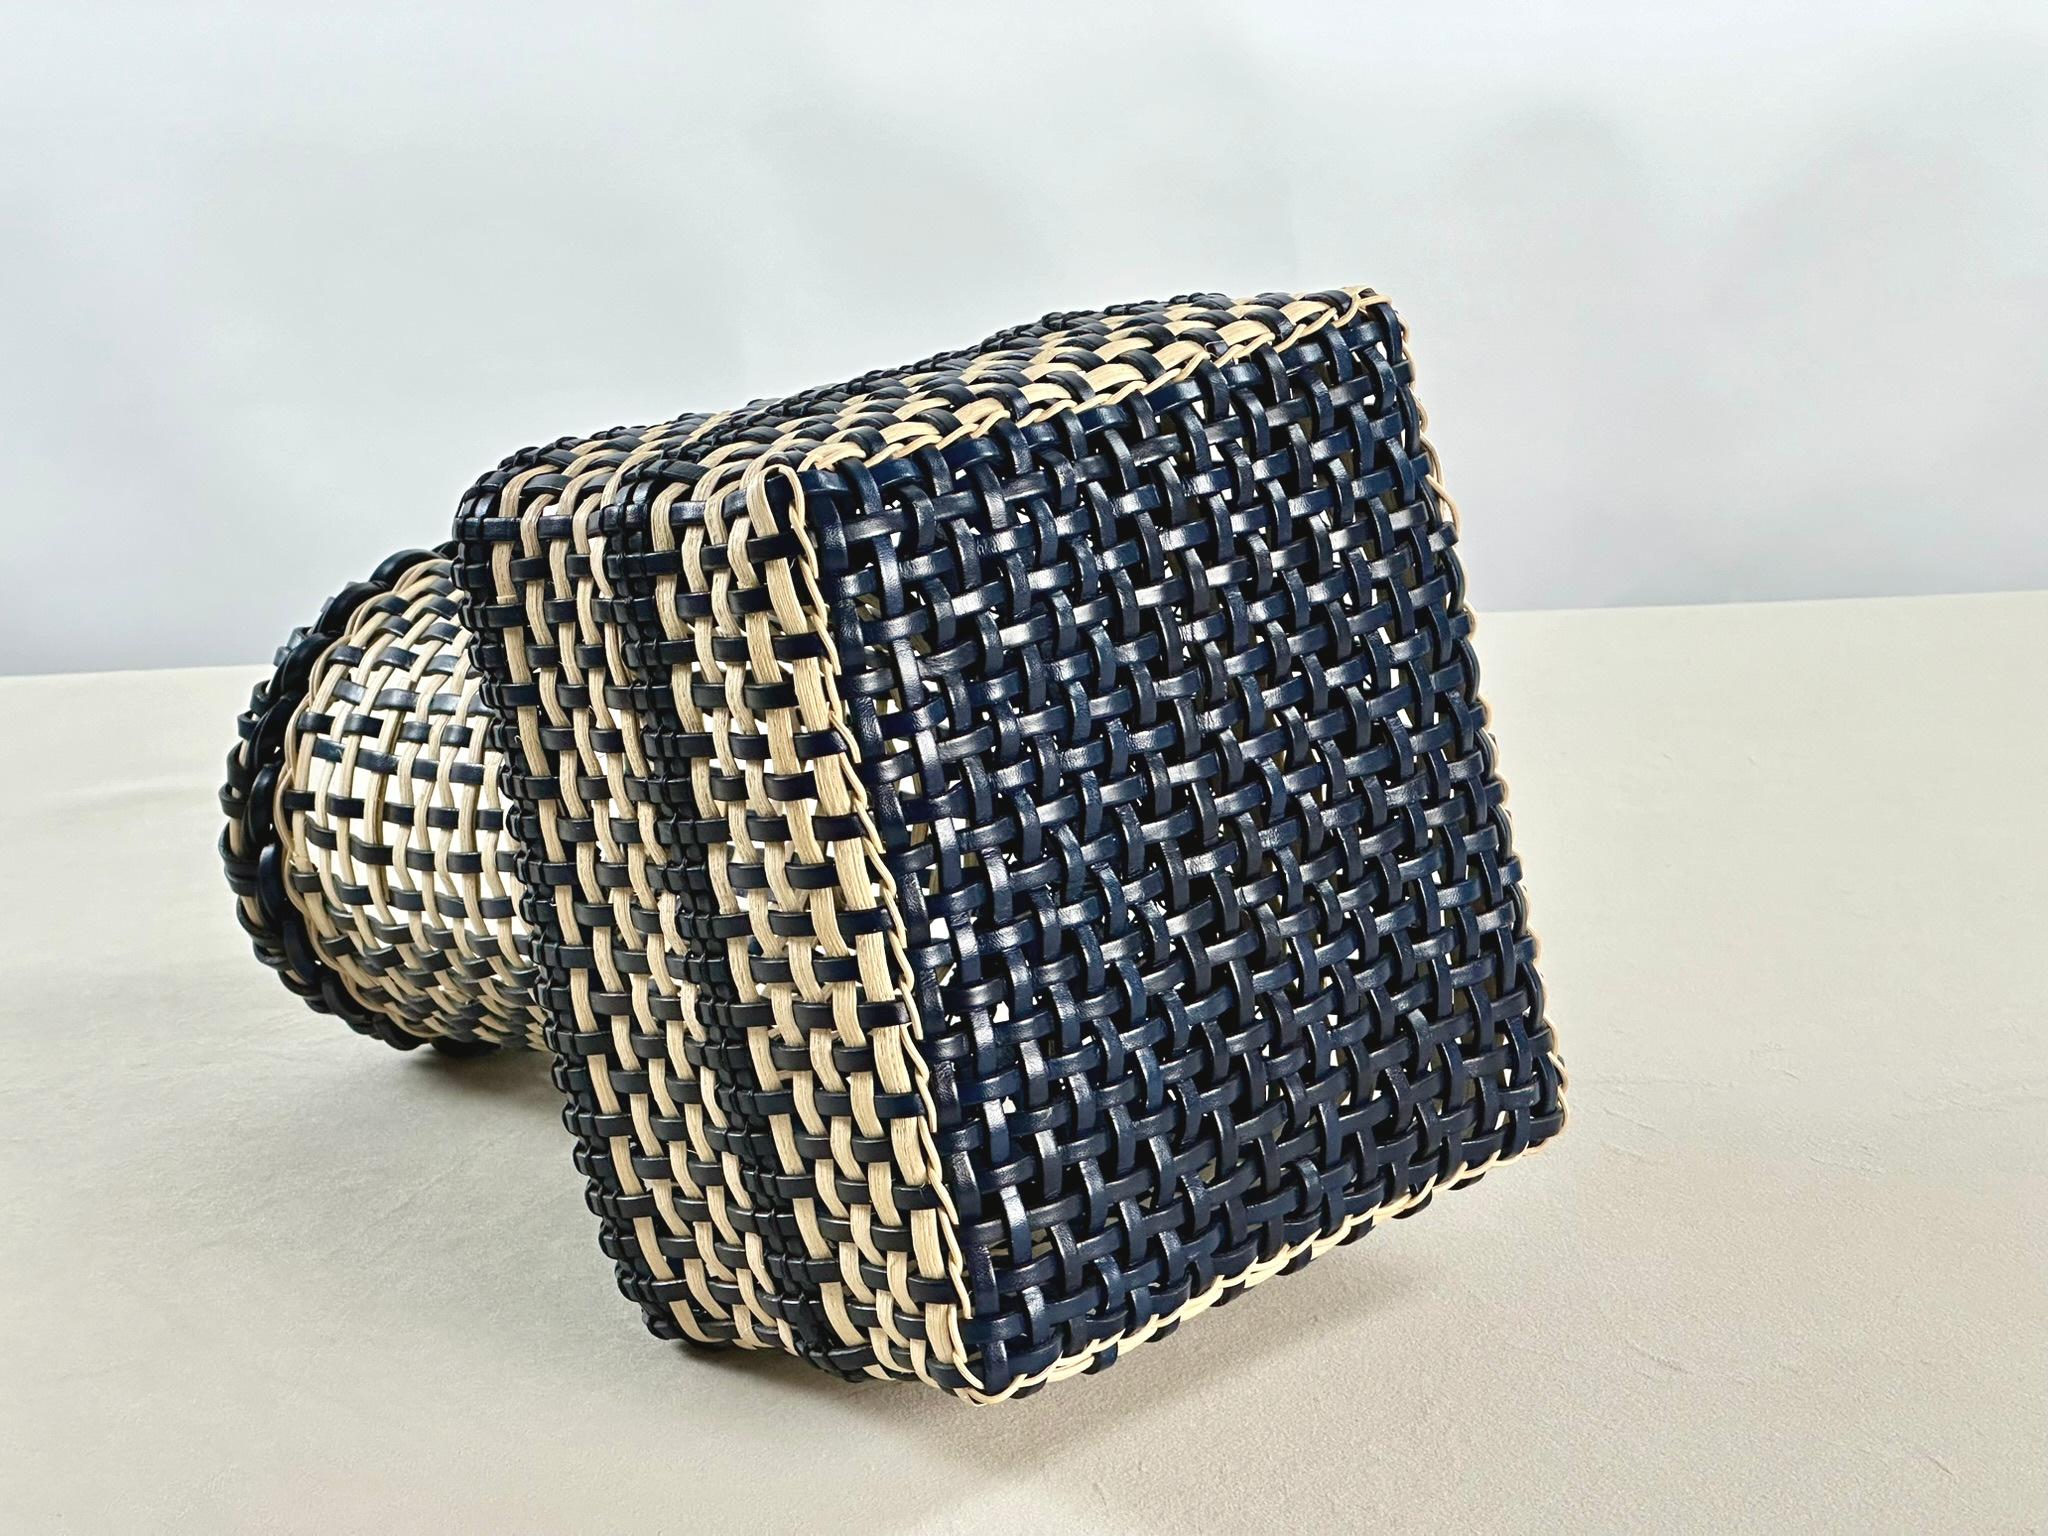 Contemporary Japanese Ikebana Inspired Leather & Cane Handmade Basket Navy & Off White Color For Sale